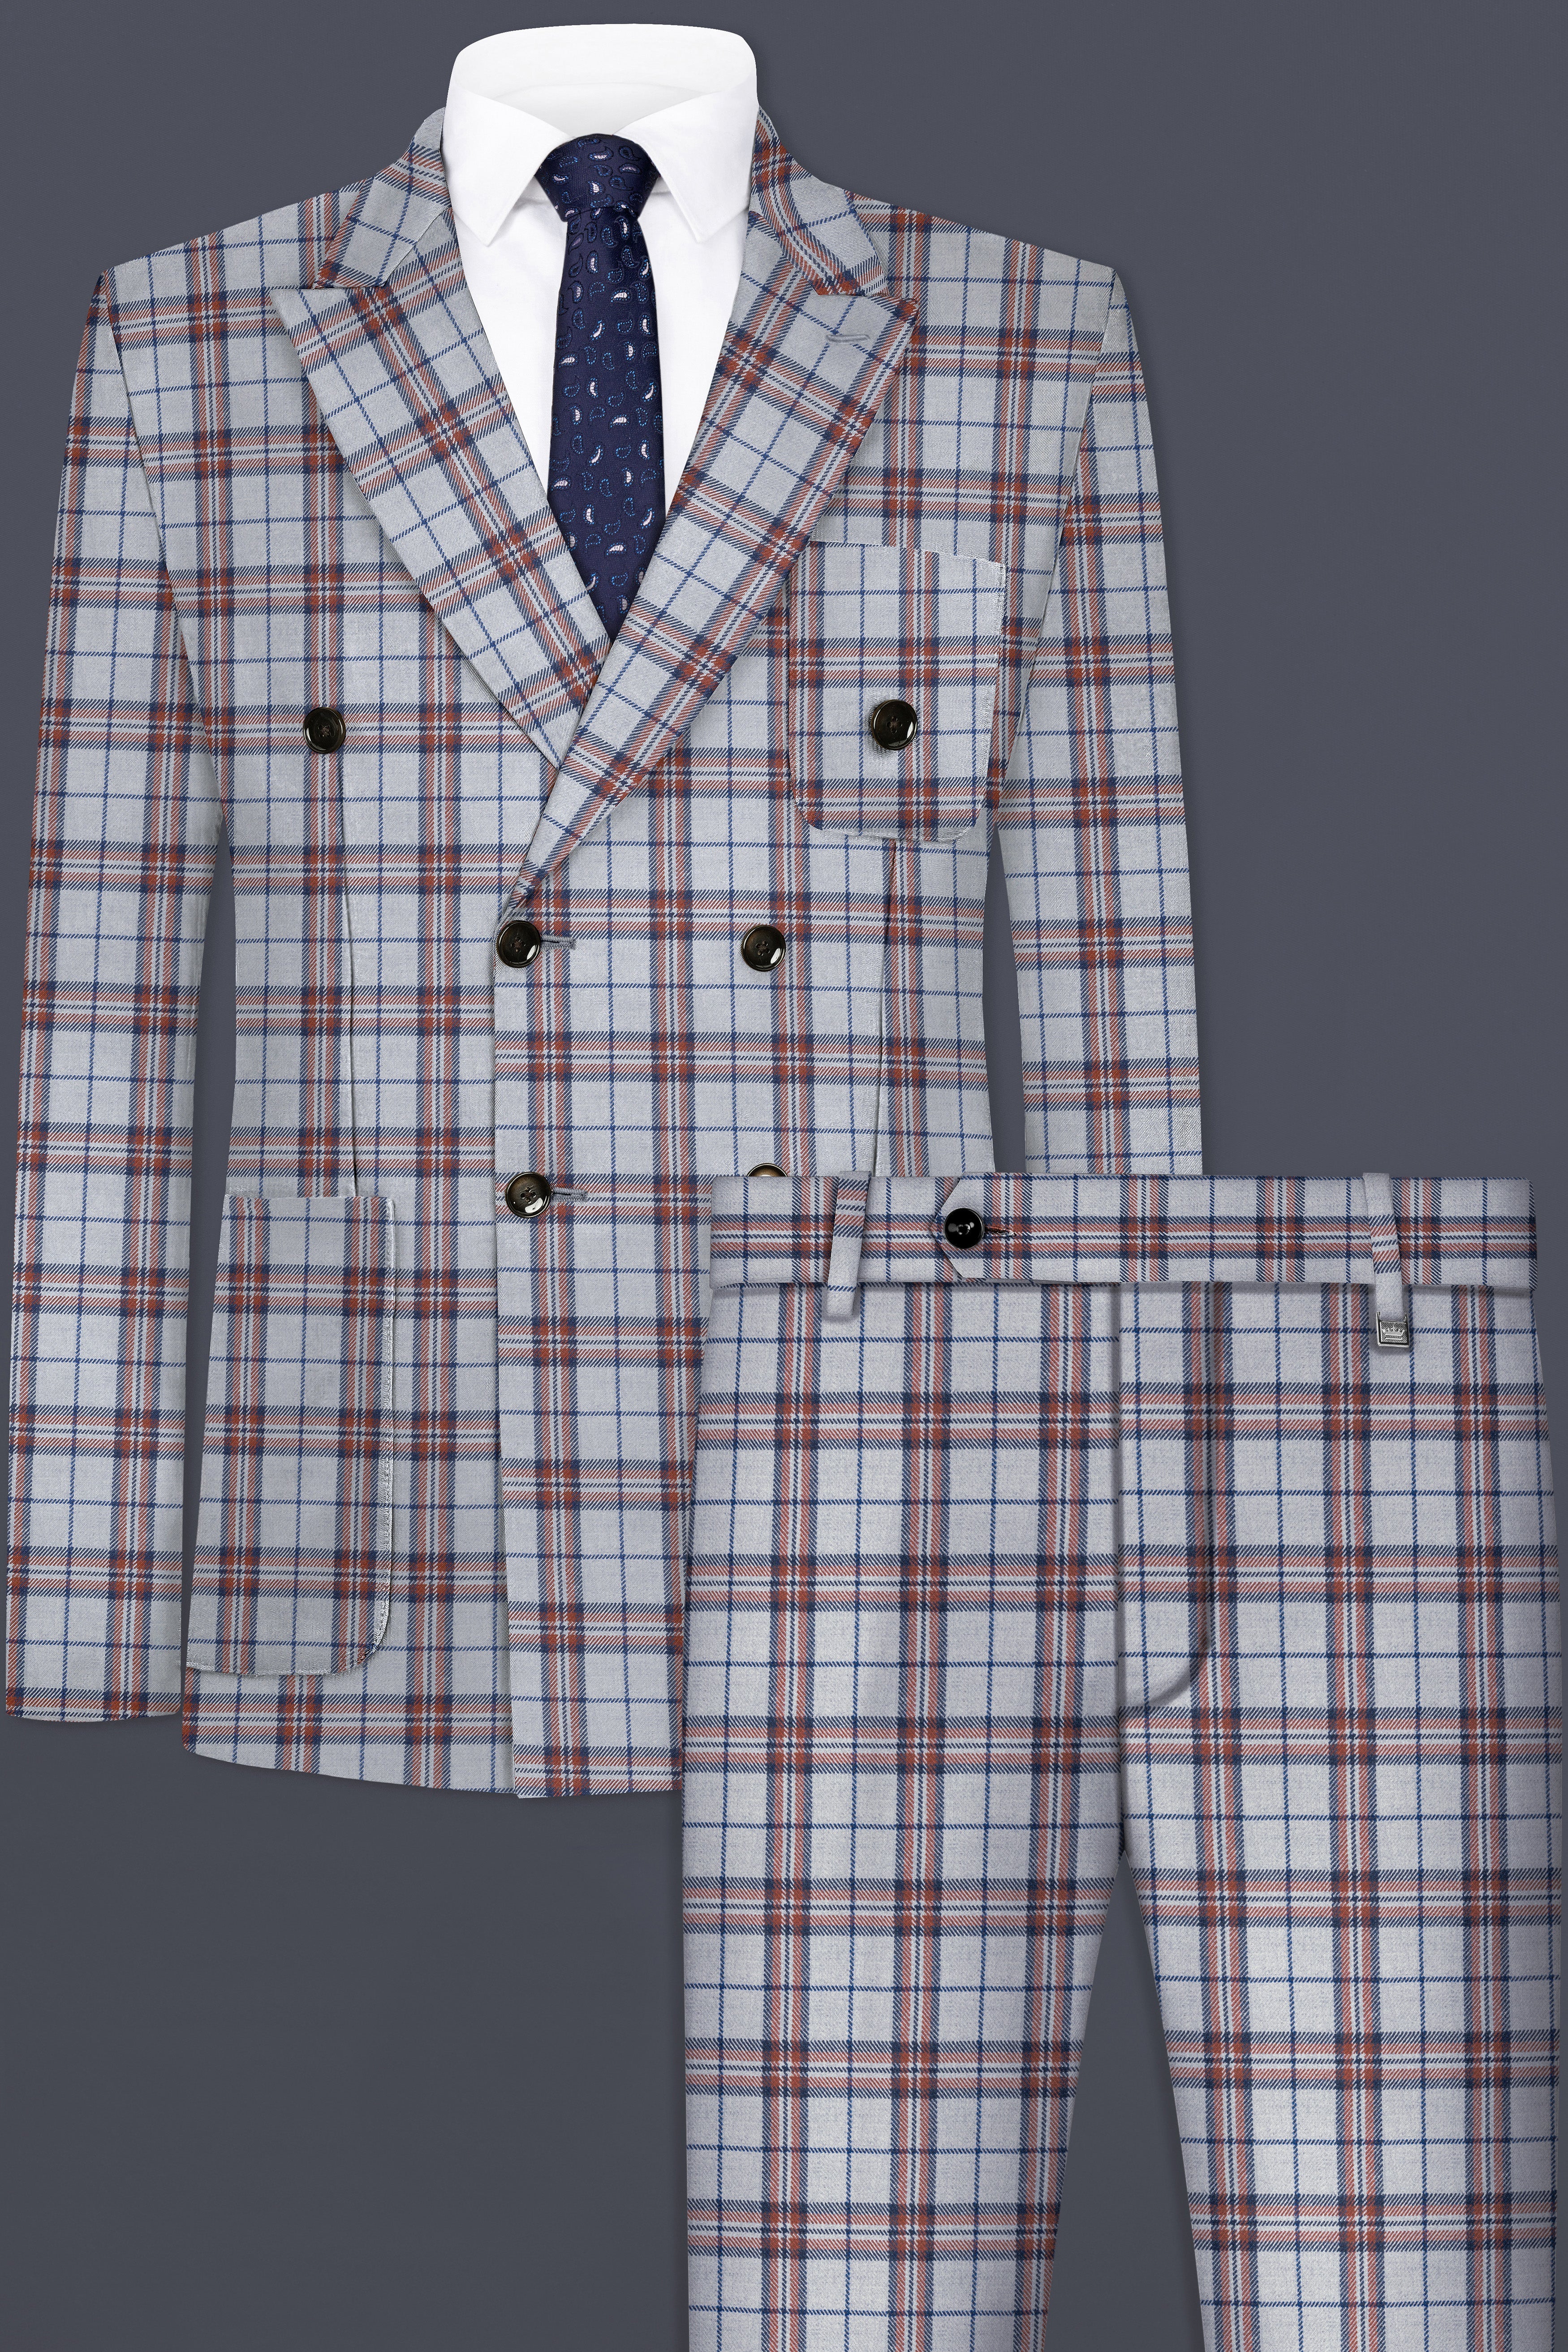 Cadet Grey with Maroon and Blue Plaid Double Breasted Tweed Suit